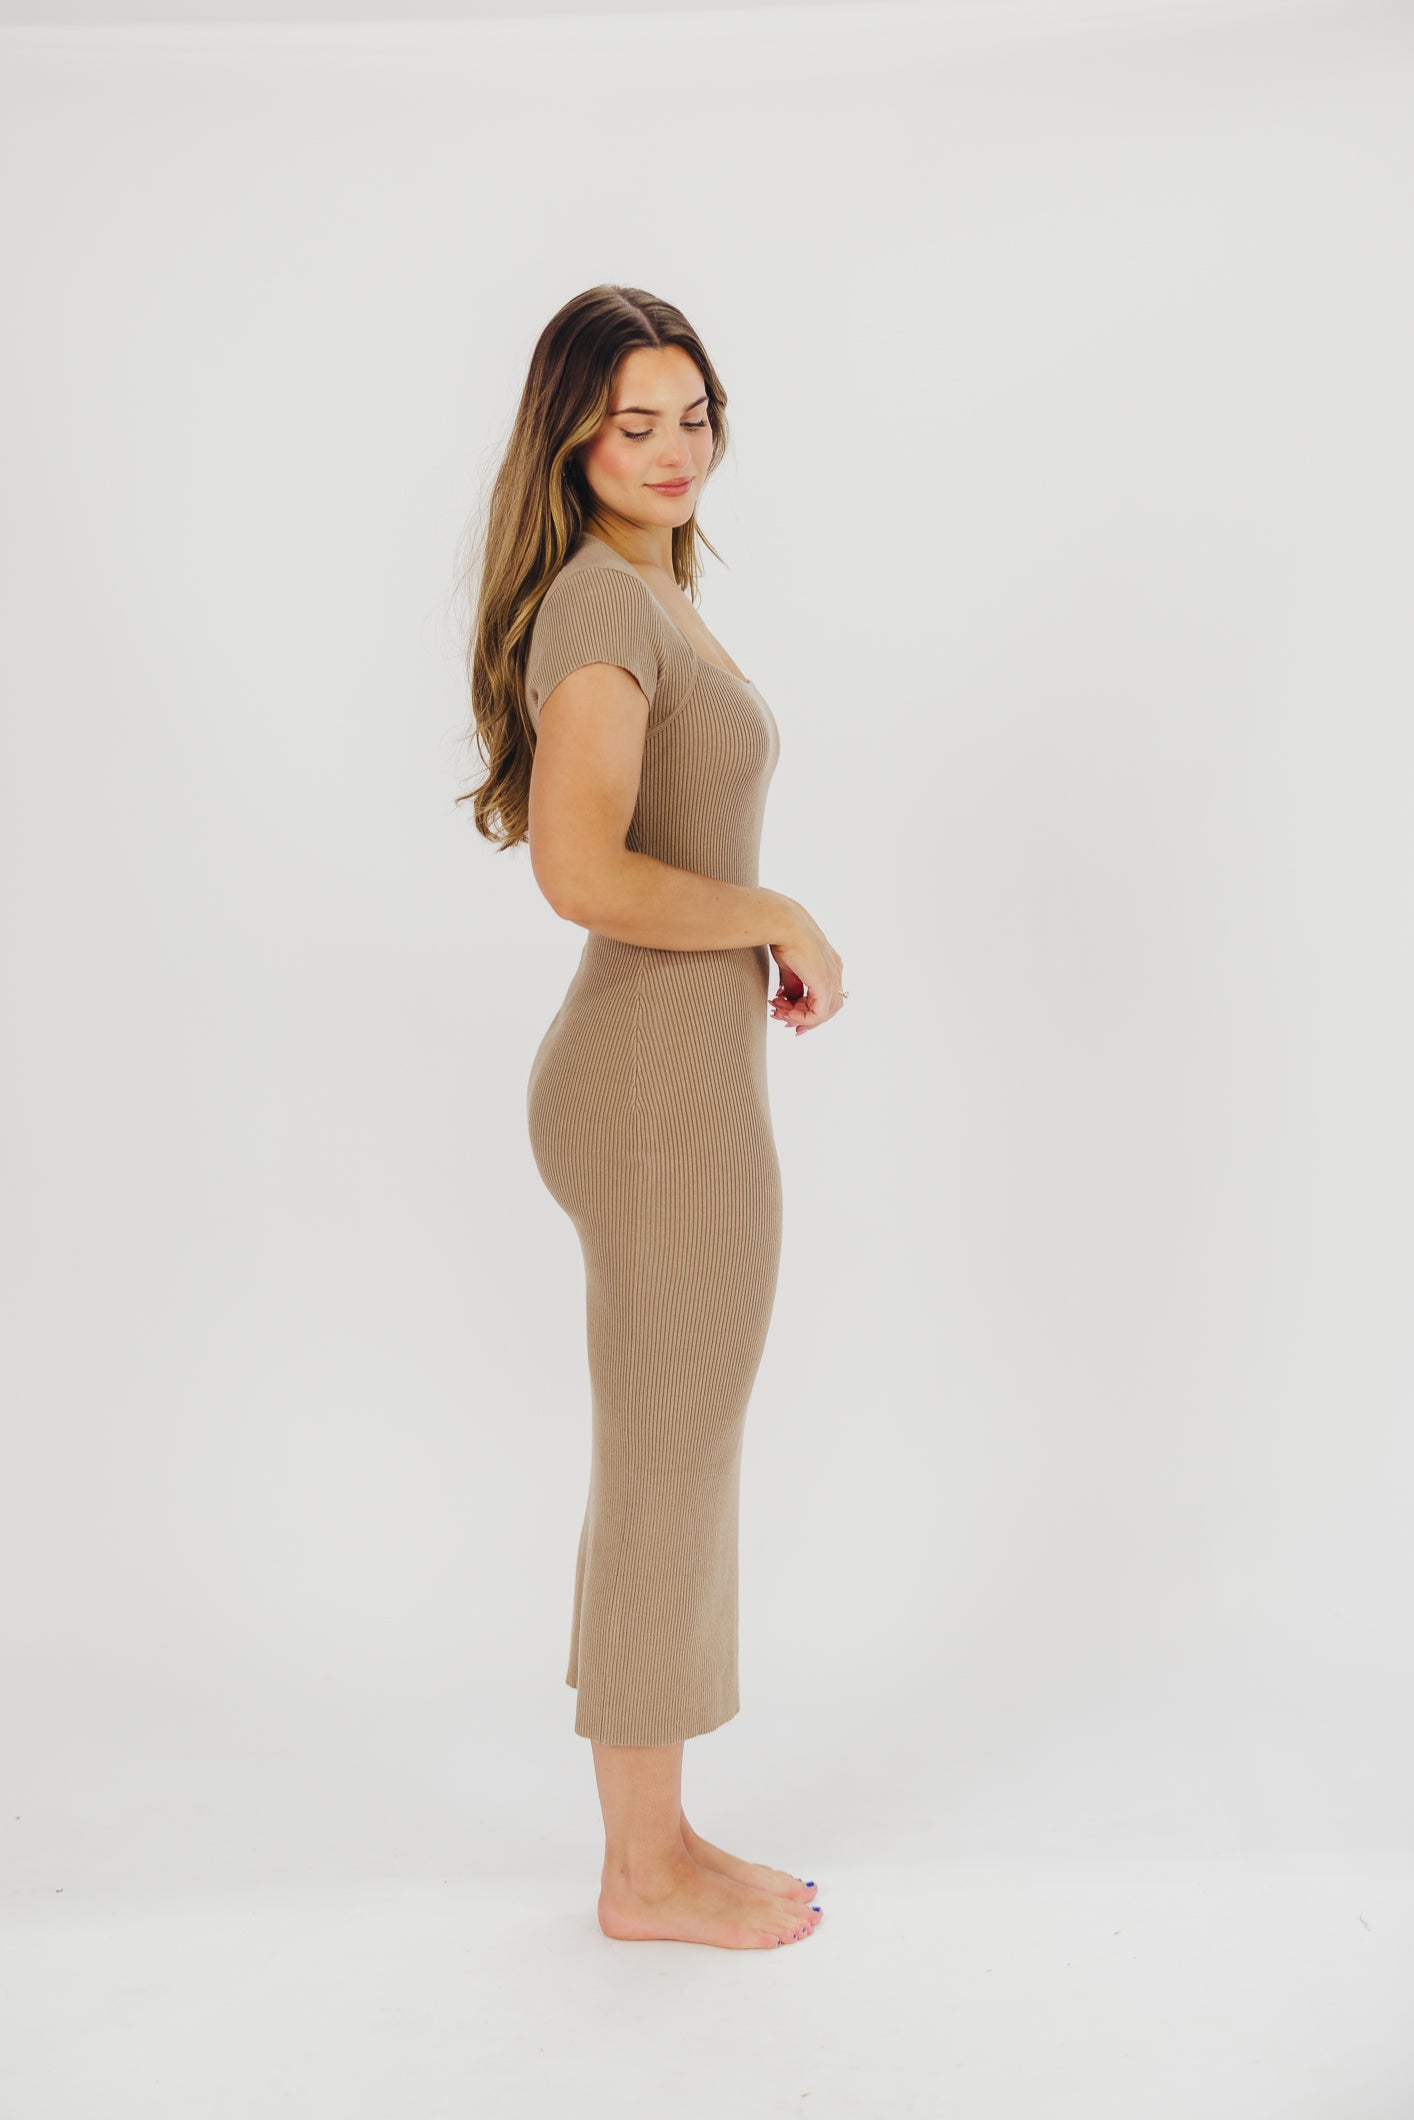 Wren Ribbed Knit Maxi Dress with Square Neckline in Taupe (XS-XL) - Worth Collective Exclusive